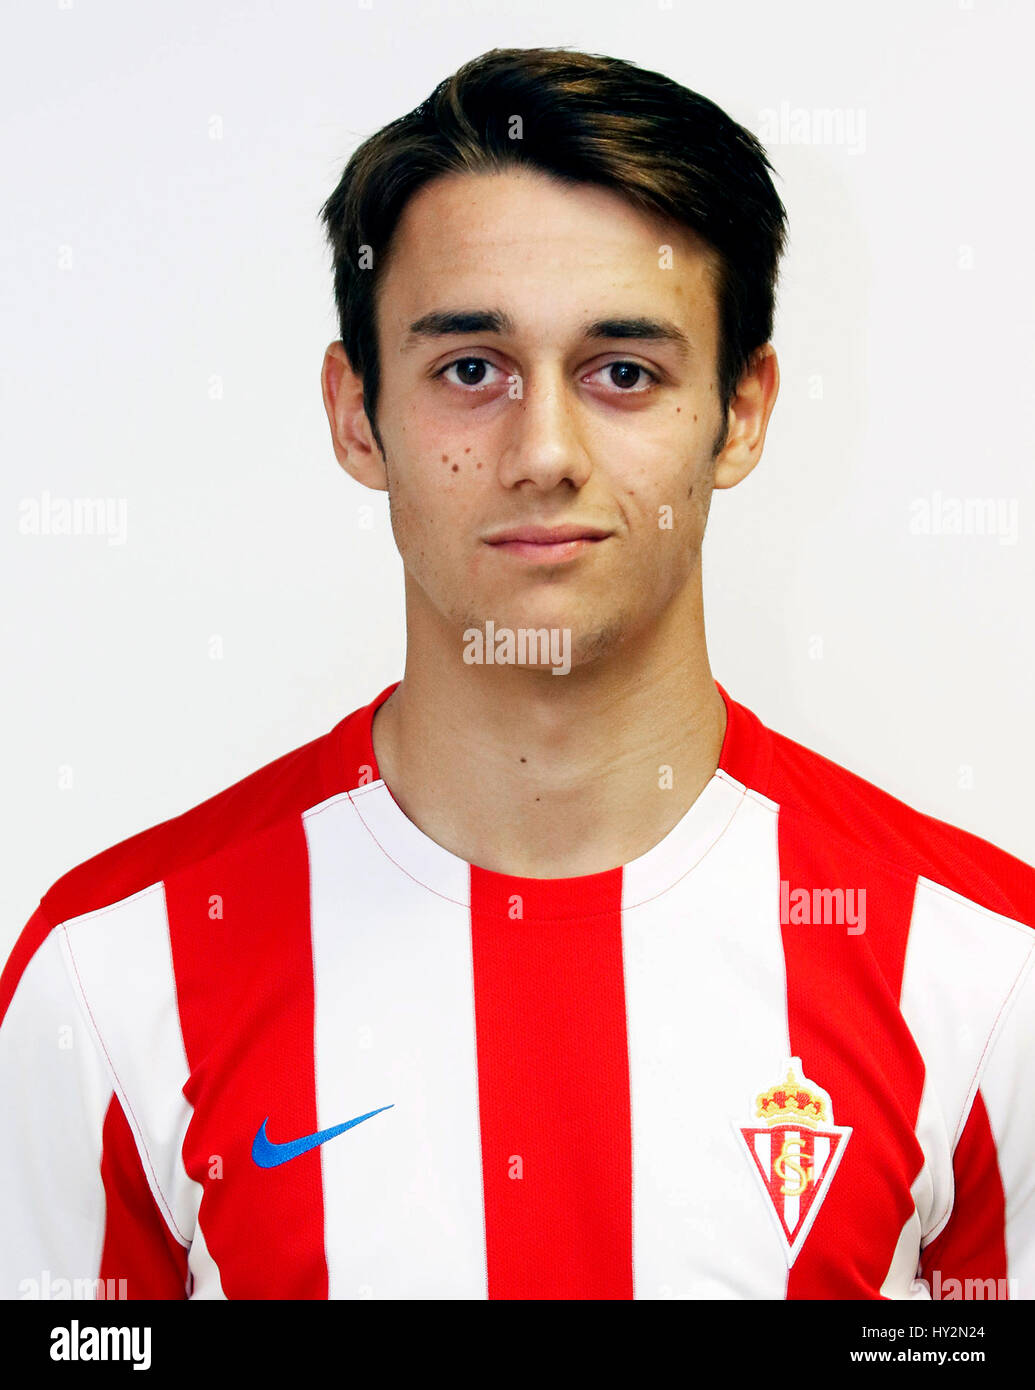 Sporting gijon hi-res stock photography and images - Alamy